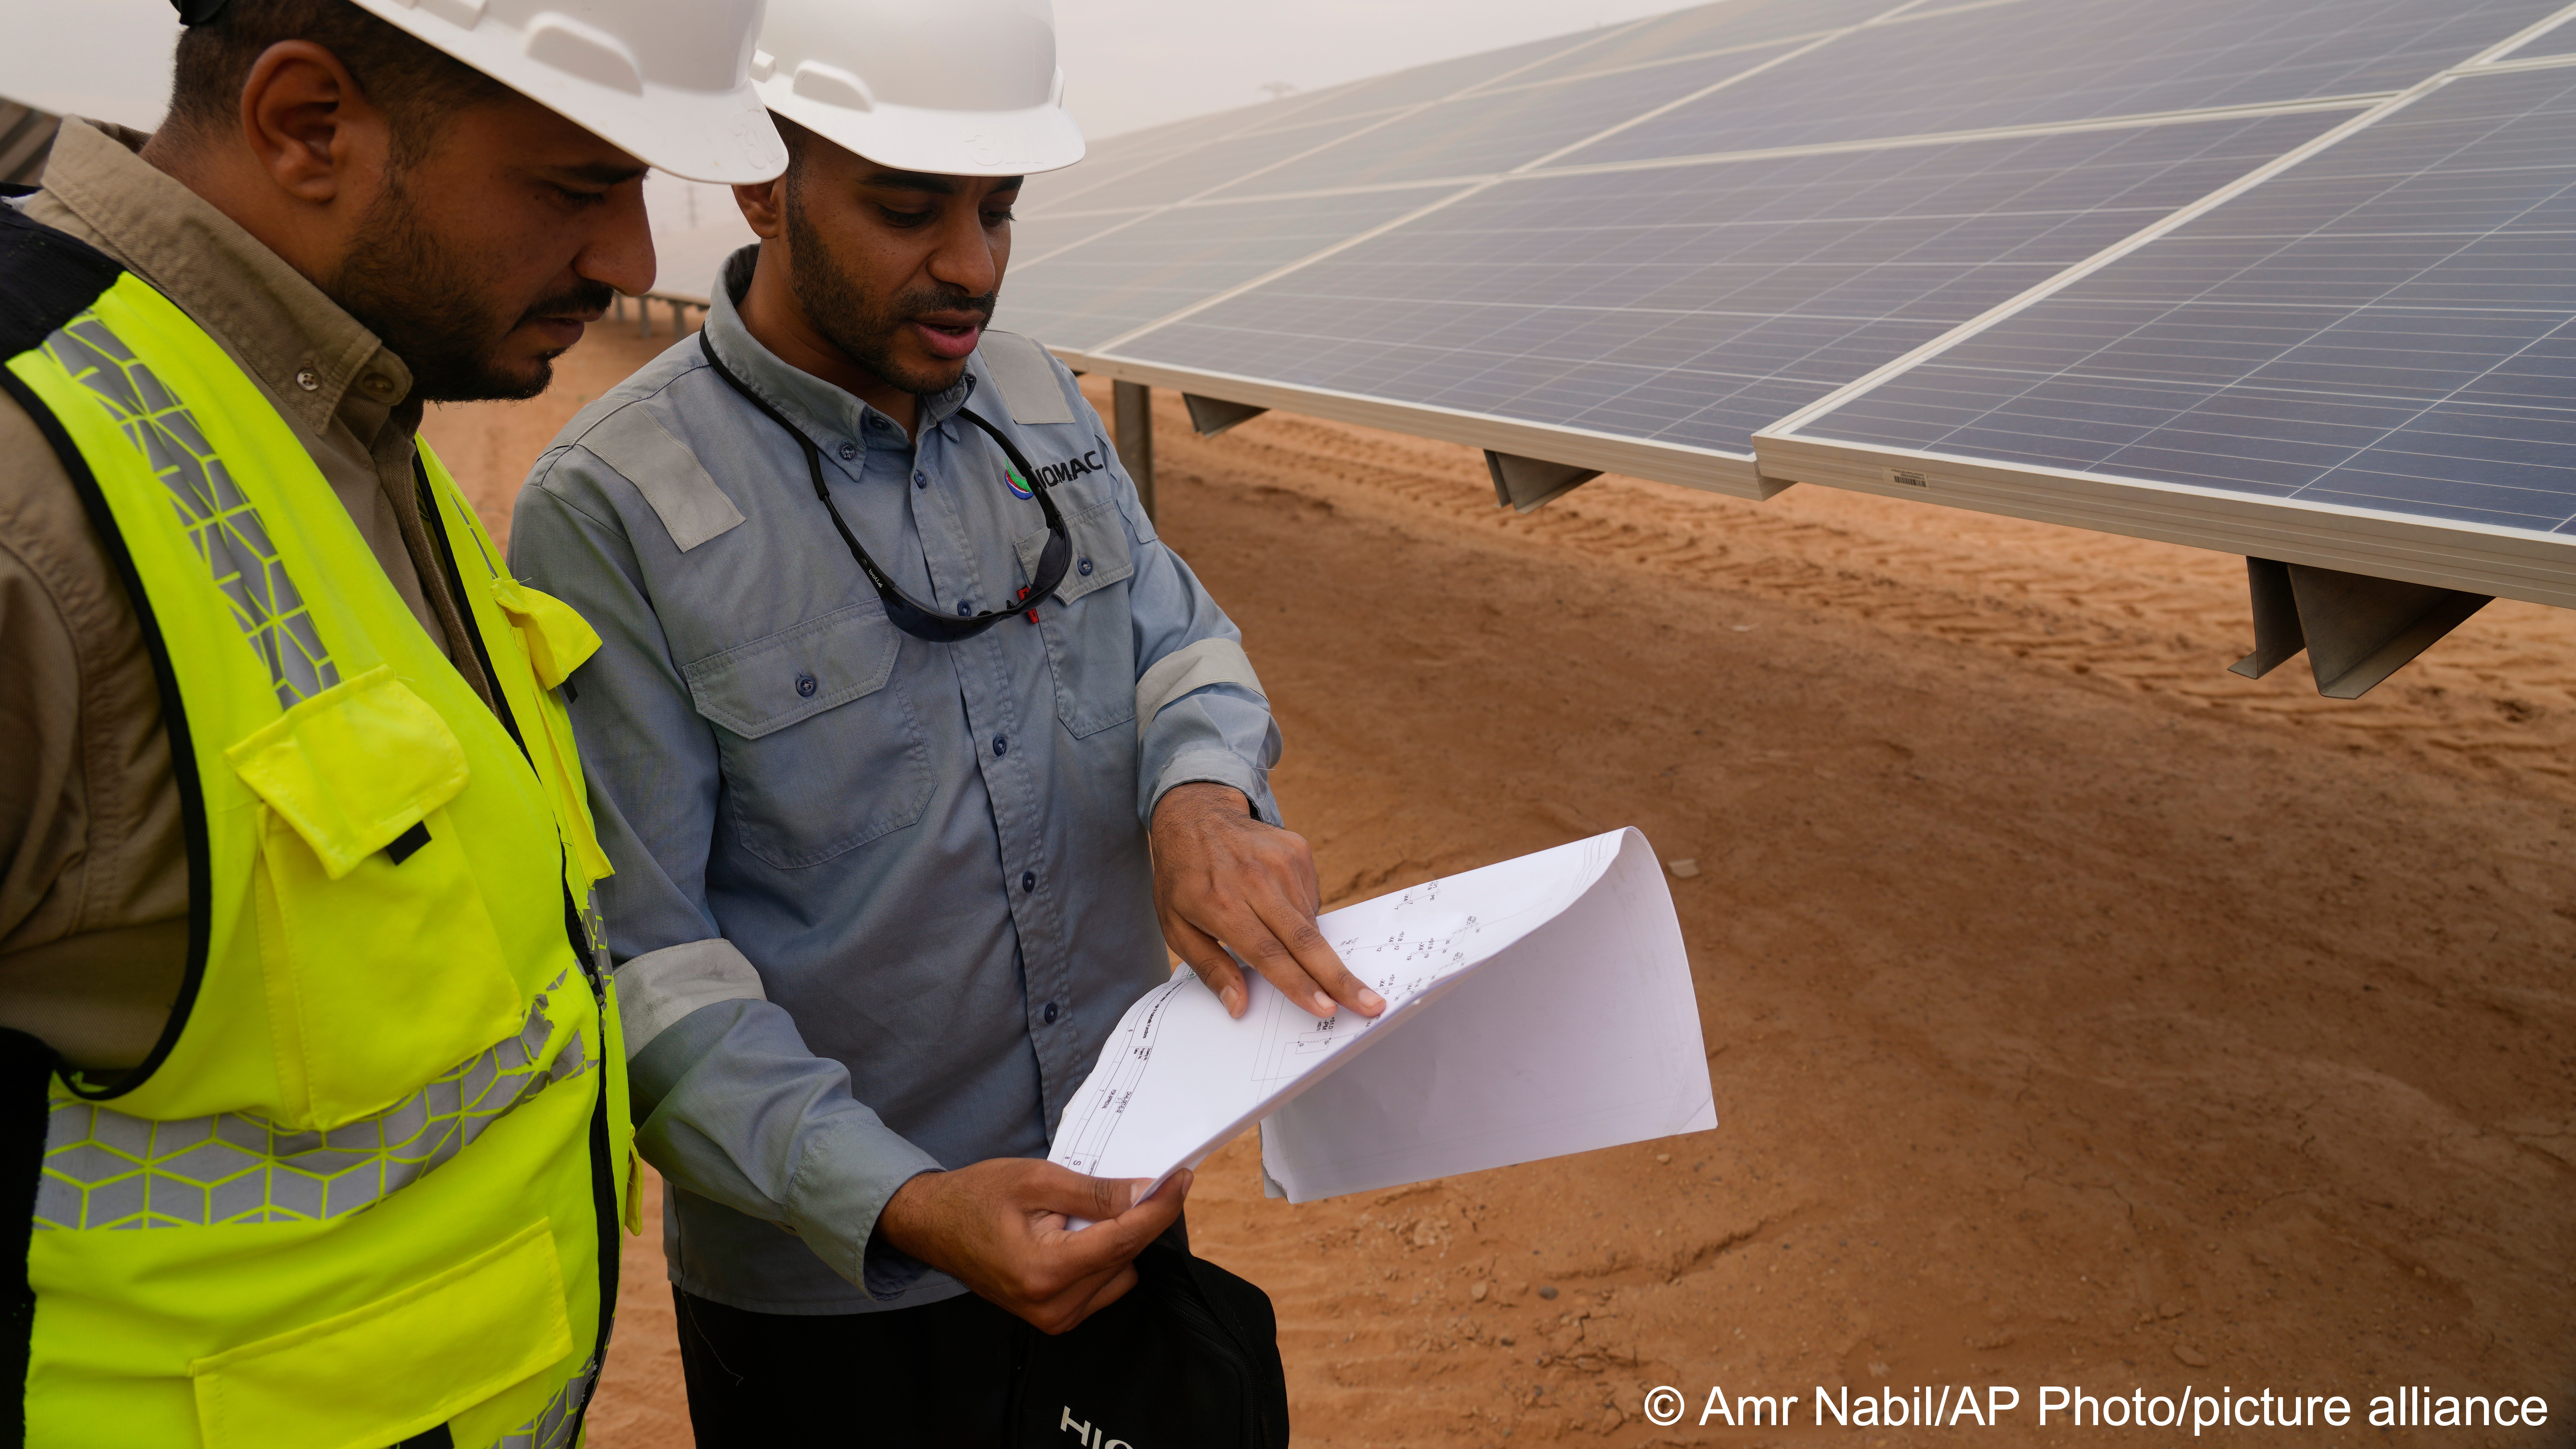 Engineers talk next to photovoltaic solar panels at Benban Solar Park, one of the world’s largest solar power plants in the world, in Aswan, Egypt, 19 October 2022 (photo: AP Photo/Amr Nabil)